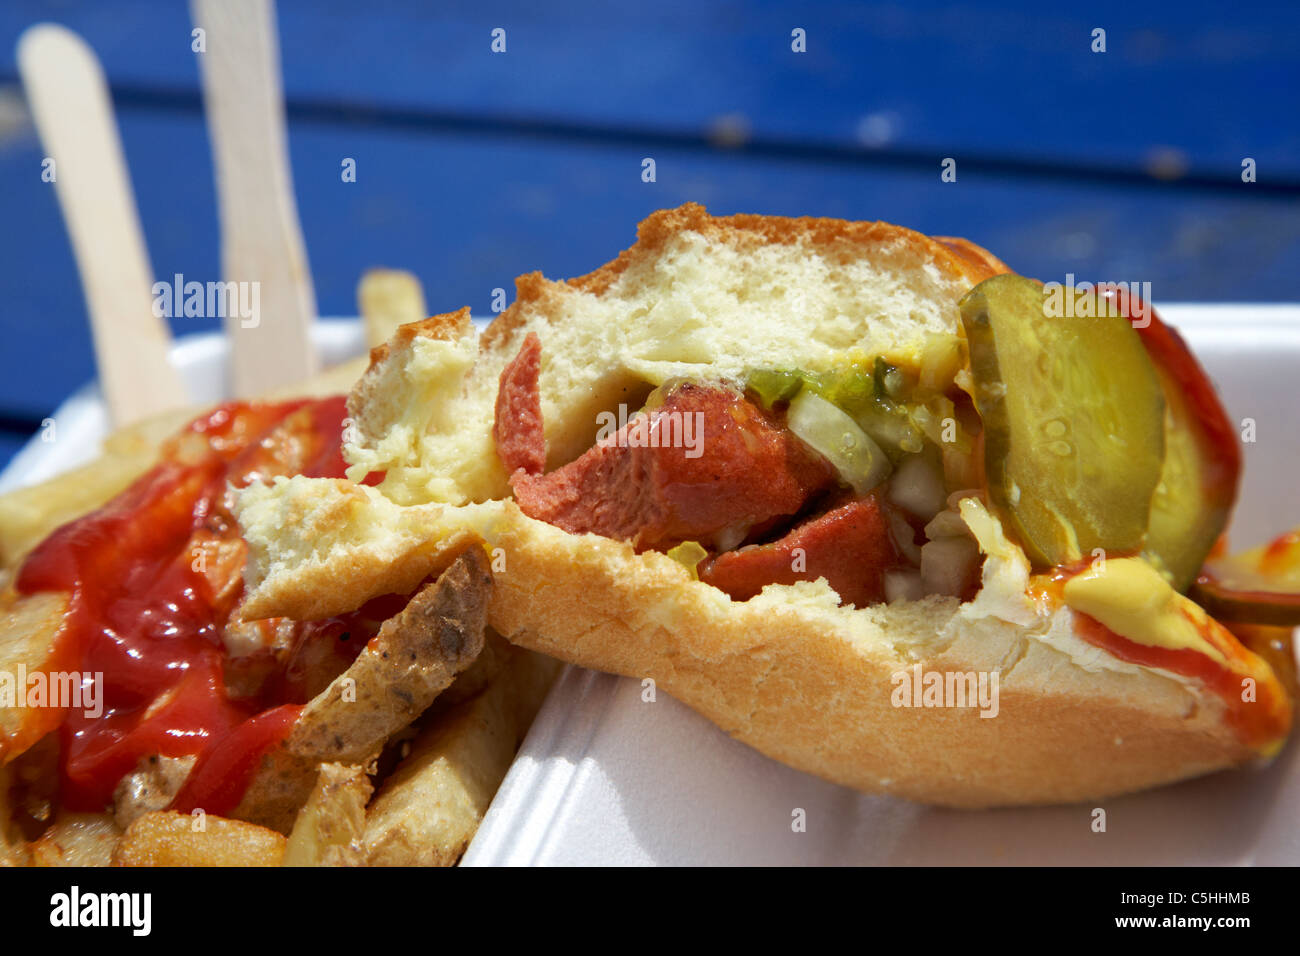 partially eaten takeaway hot dog and fries from a fast food stall toronto ontario canada Stock Photo